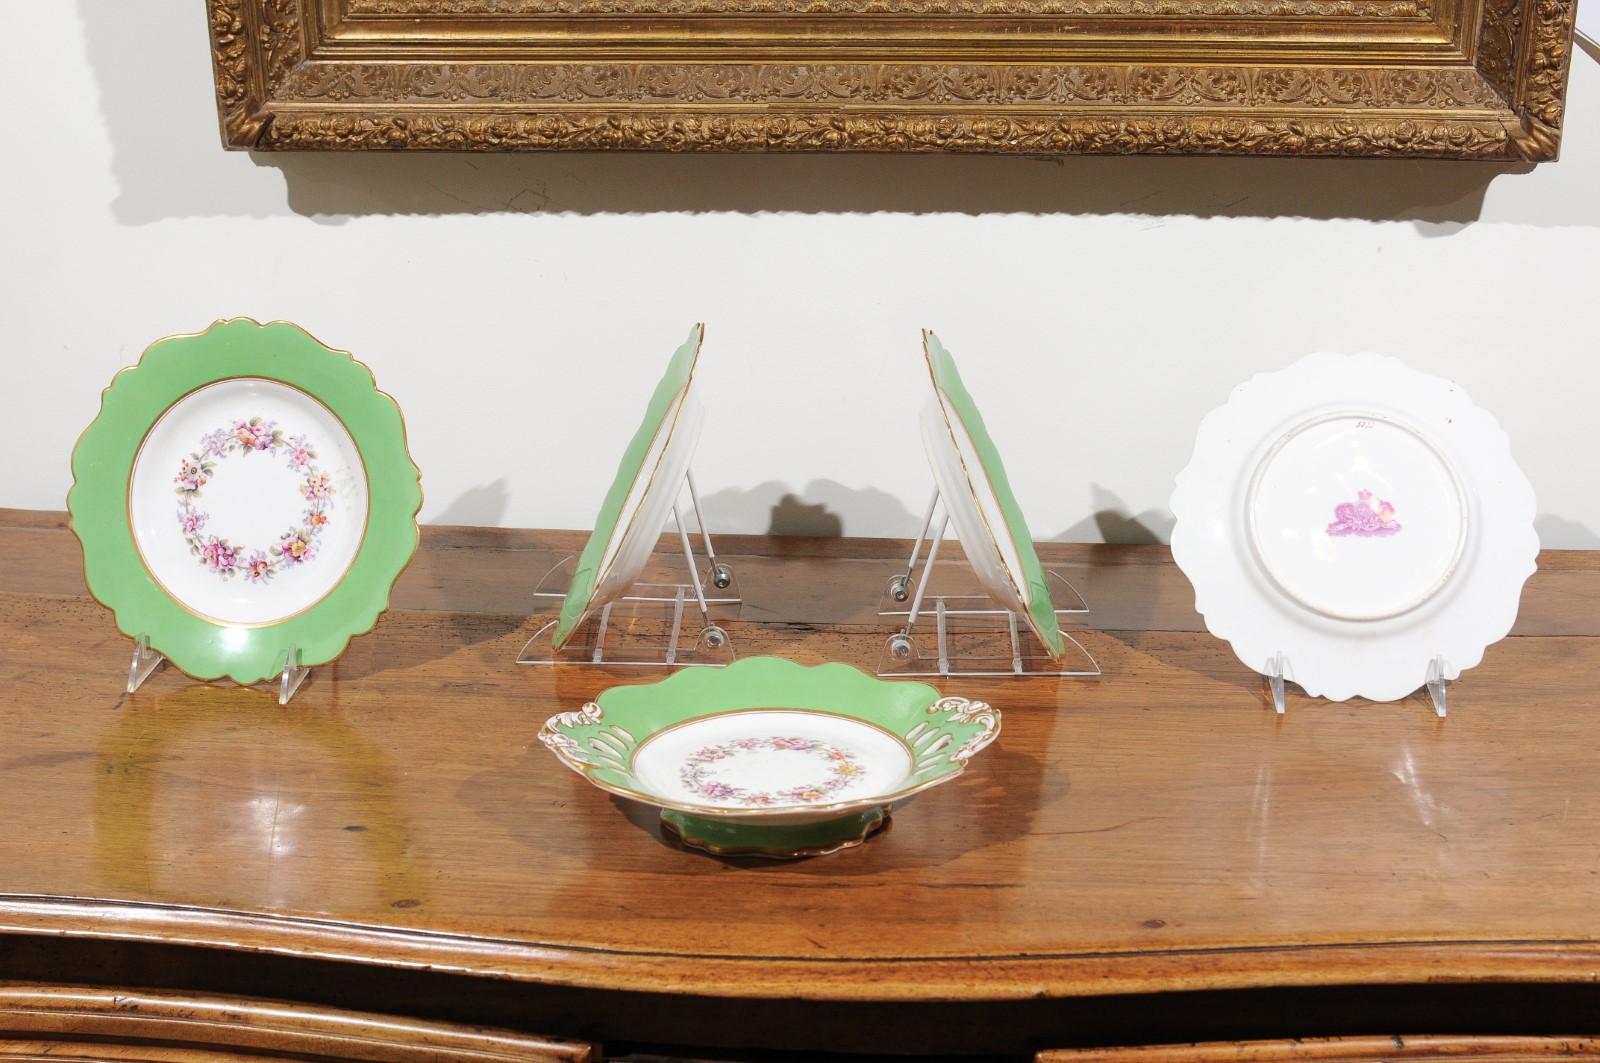 Ridgway Porcelain Dinner Plates and Compote with Green Rim and Floral Décor For Sale 1